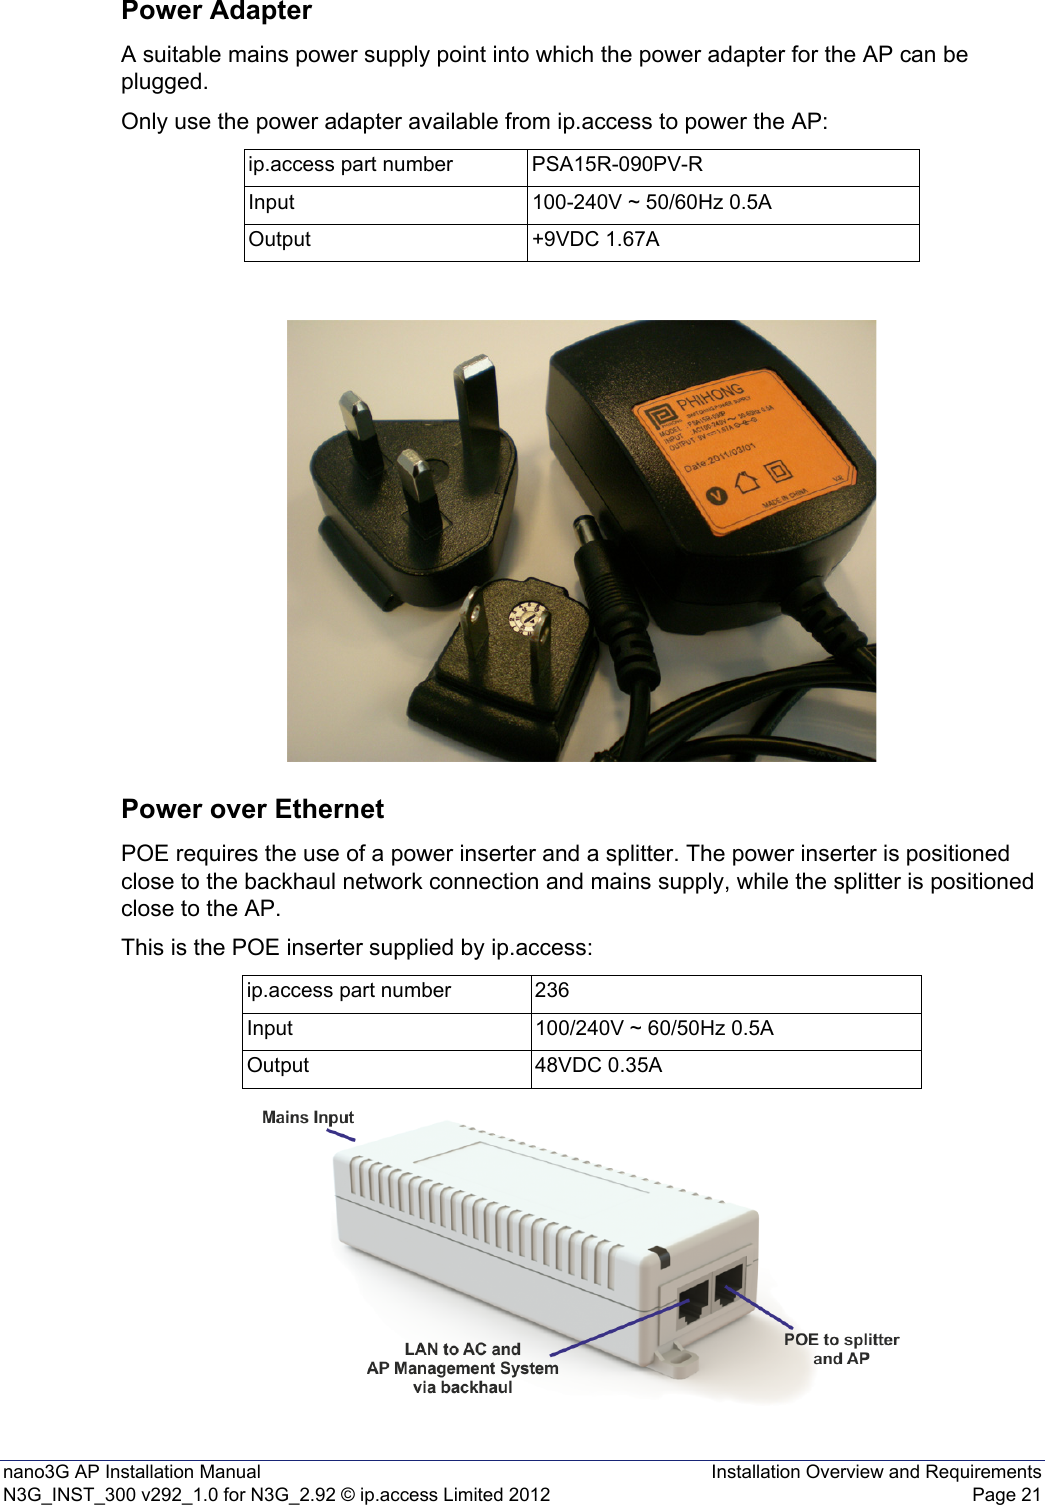 nano3G AP Installation Manual Installation Overview and RequirementsN3G_INST_300 v292_1.0 for N3G_2.92 © ip.access Limited 2012 Page 21Power AdapterA suitable mains power supply point into which the power adapter for the AP can be plugged.Only use the power adapter available from ip.access to power the AP:Power over EthernetPOE requires the use of a power inserter and a splitter. The power inserter is positioned close to the backhaul network connection and mains supply, while the splitter is positioned close to the AP.This is the POE inserter supplied by ip.access:ip.access part number PSA15R-090PV-RInput 100-240V ~ 50/60Hz 0.5AOutput +9VDC 1.67Aip.access part number 236Input 100/240V ~ 60/50Hz 0.5AOutput 48VDC 0.35A